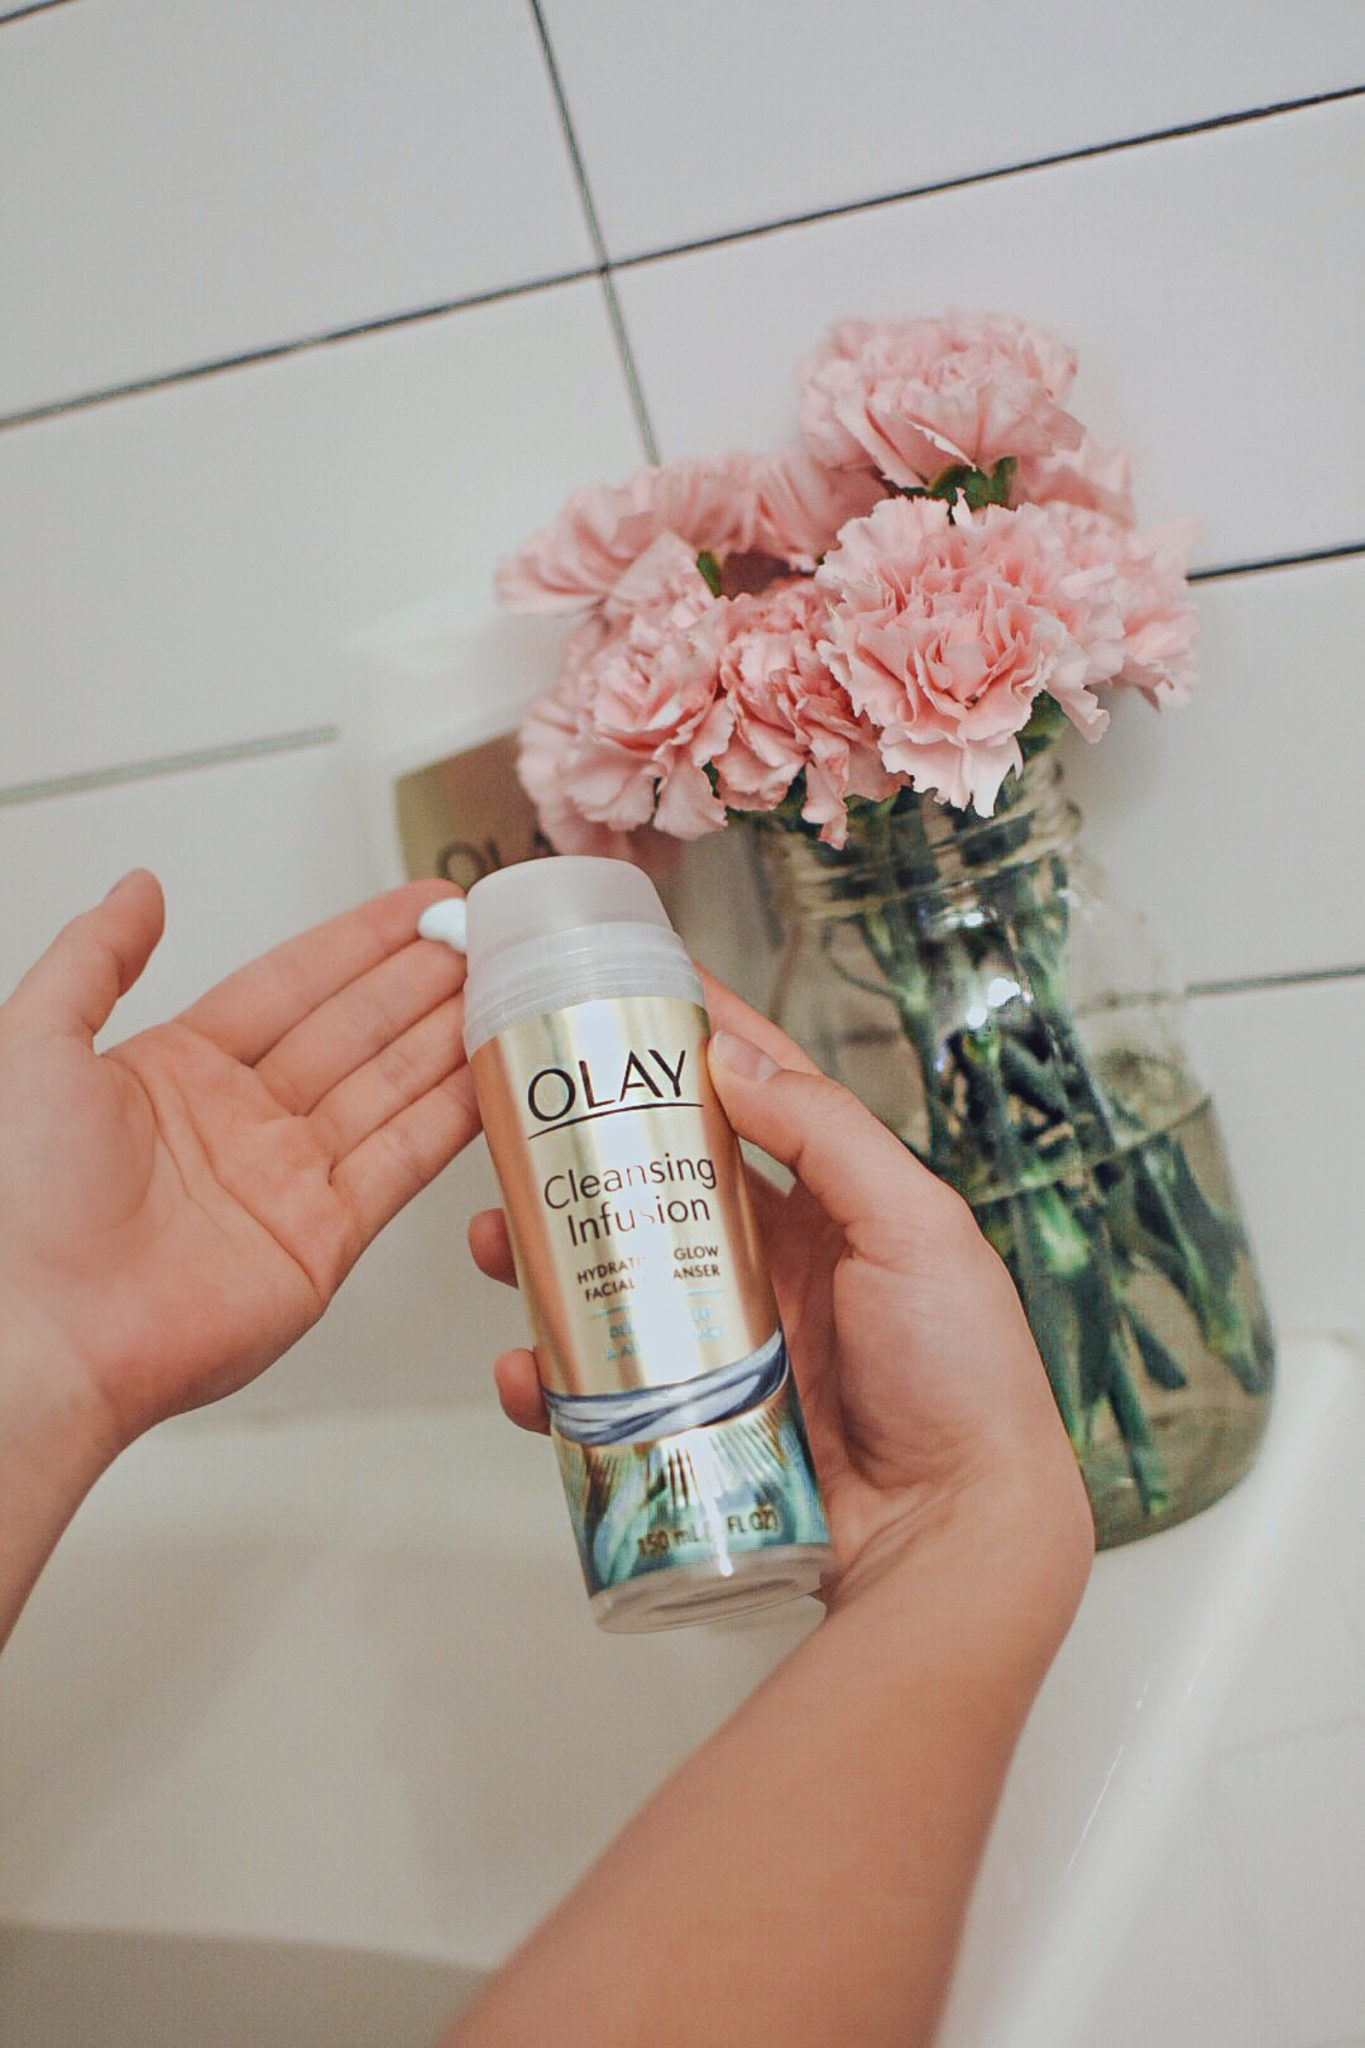 Carolina Hellal of Chic Talk trying out the new Olay Cleansing Infusions - GLOWY SKIN WITH OLAY CLEANSING INFUSIONS by popular Denver beauty blogger Chic Talk.